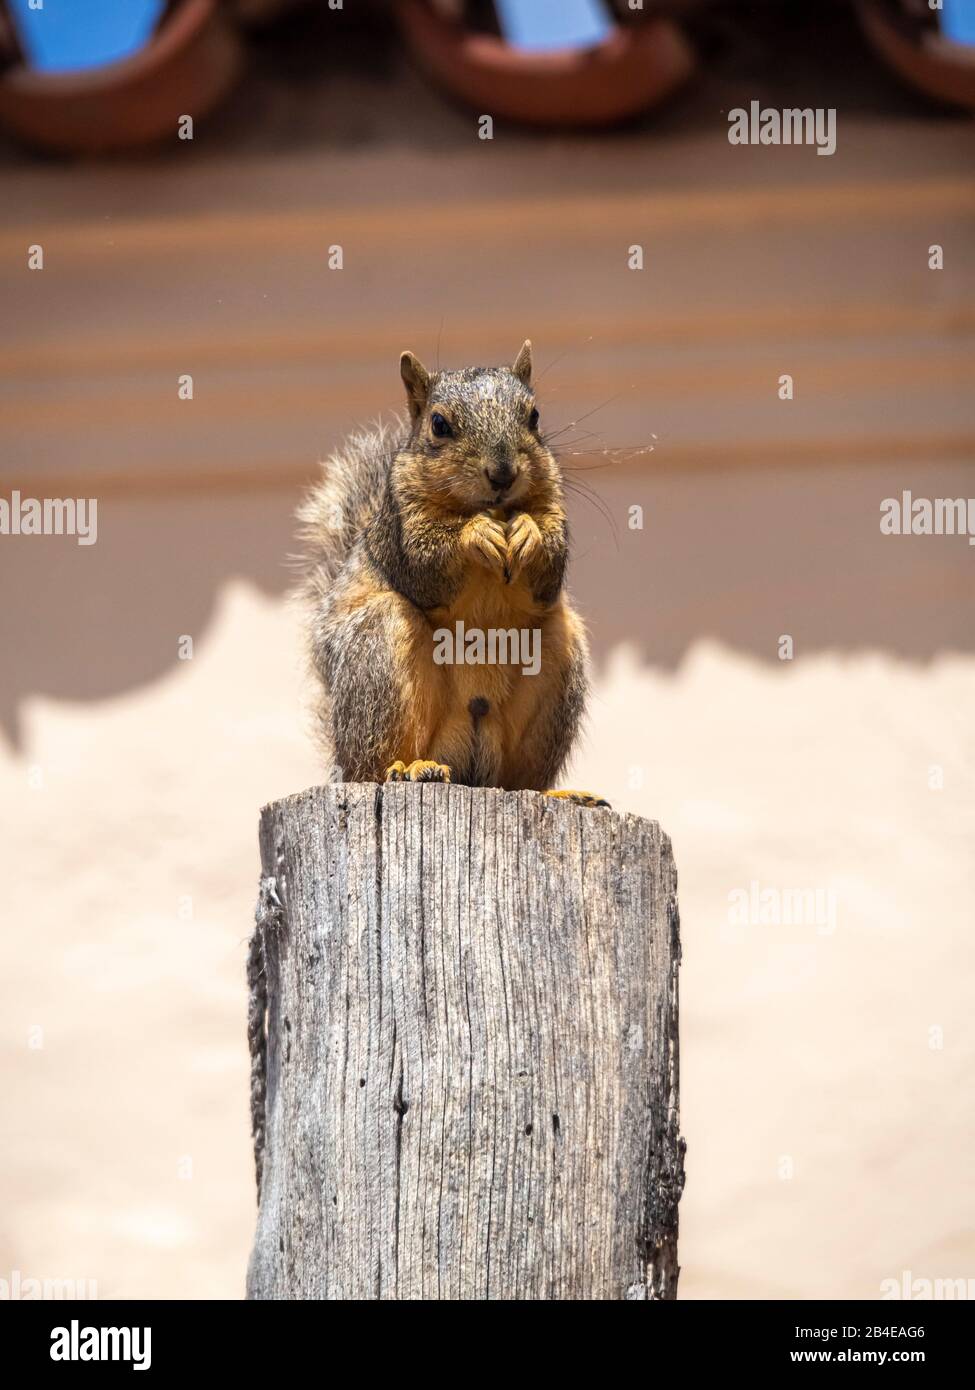 Eastern (Bryant’s) fox squirrel (sciurus niger), N. America’s largest tree squirrel. Native: eastern areas: cities and suburbs; pest in California. Stock Photo